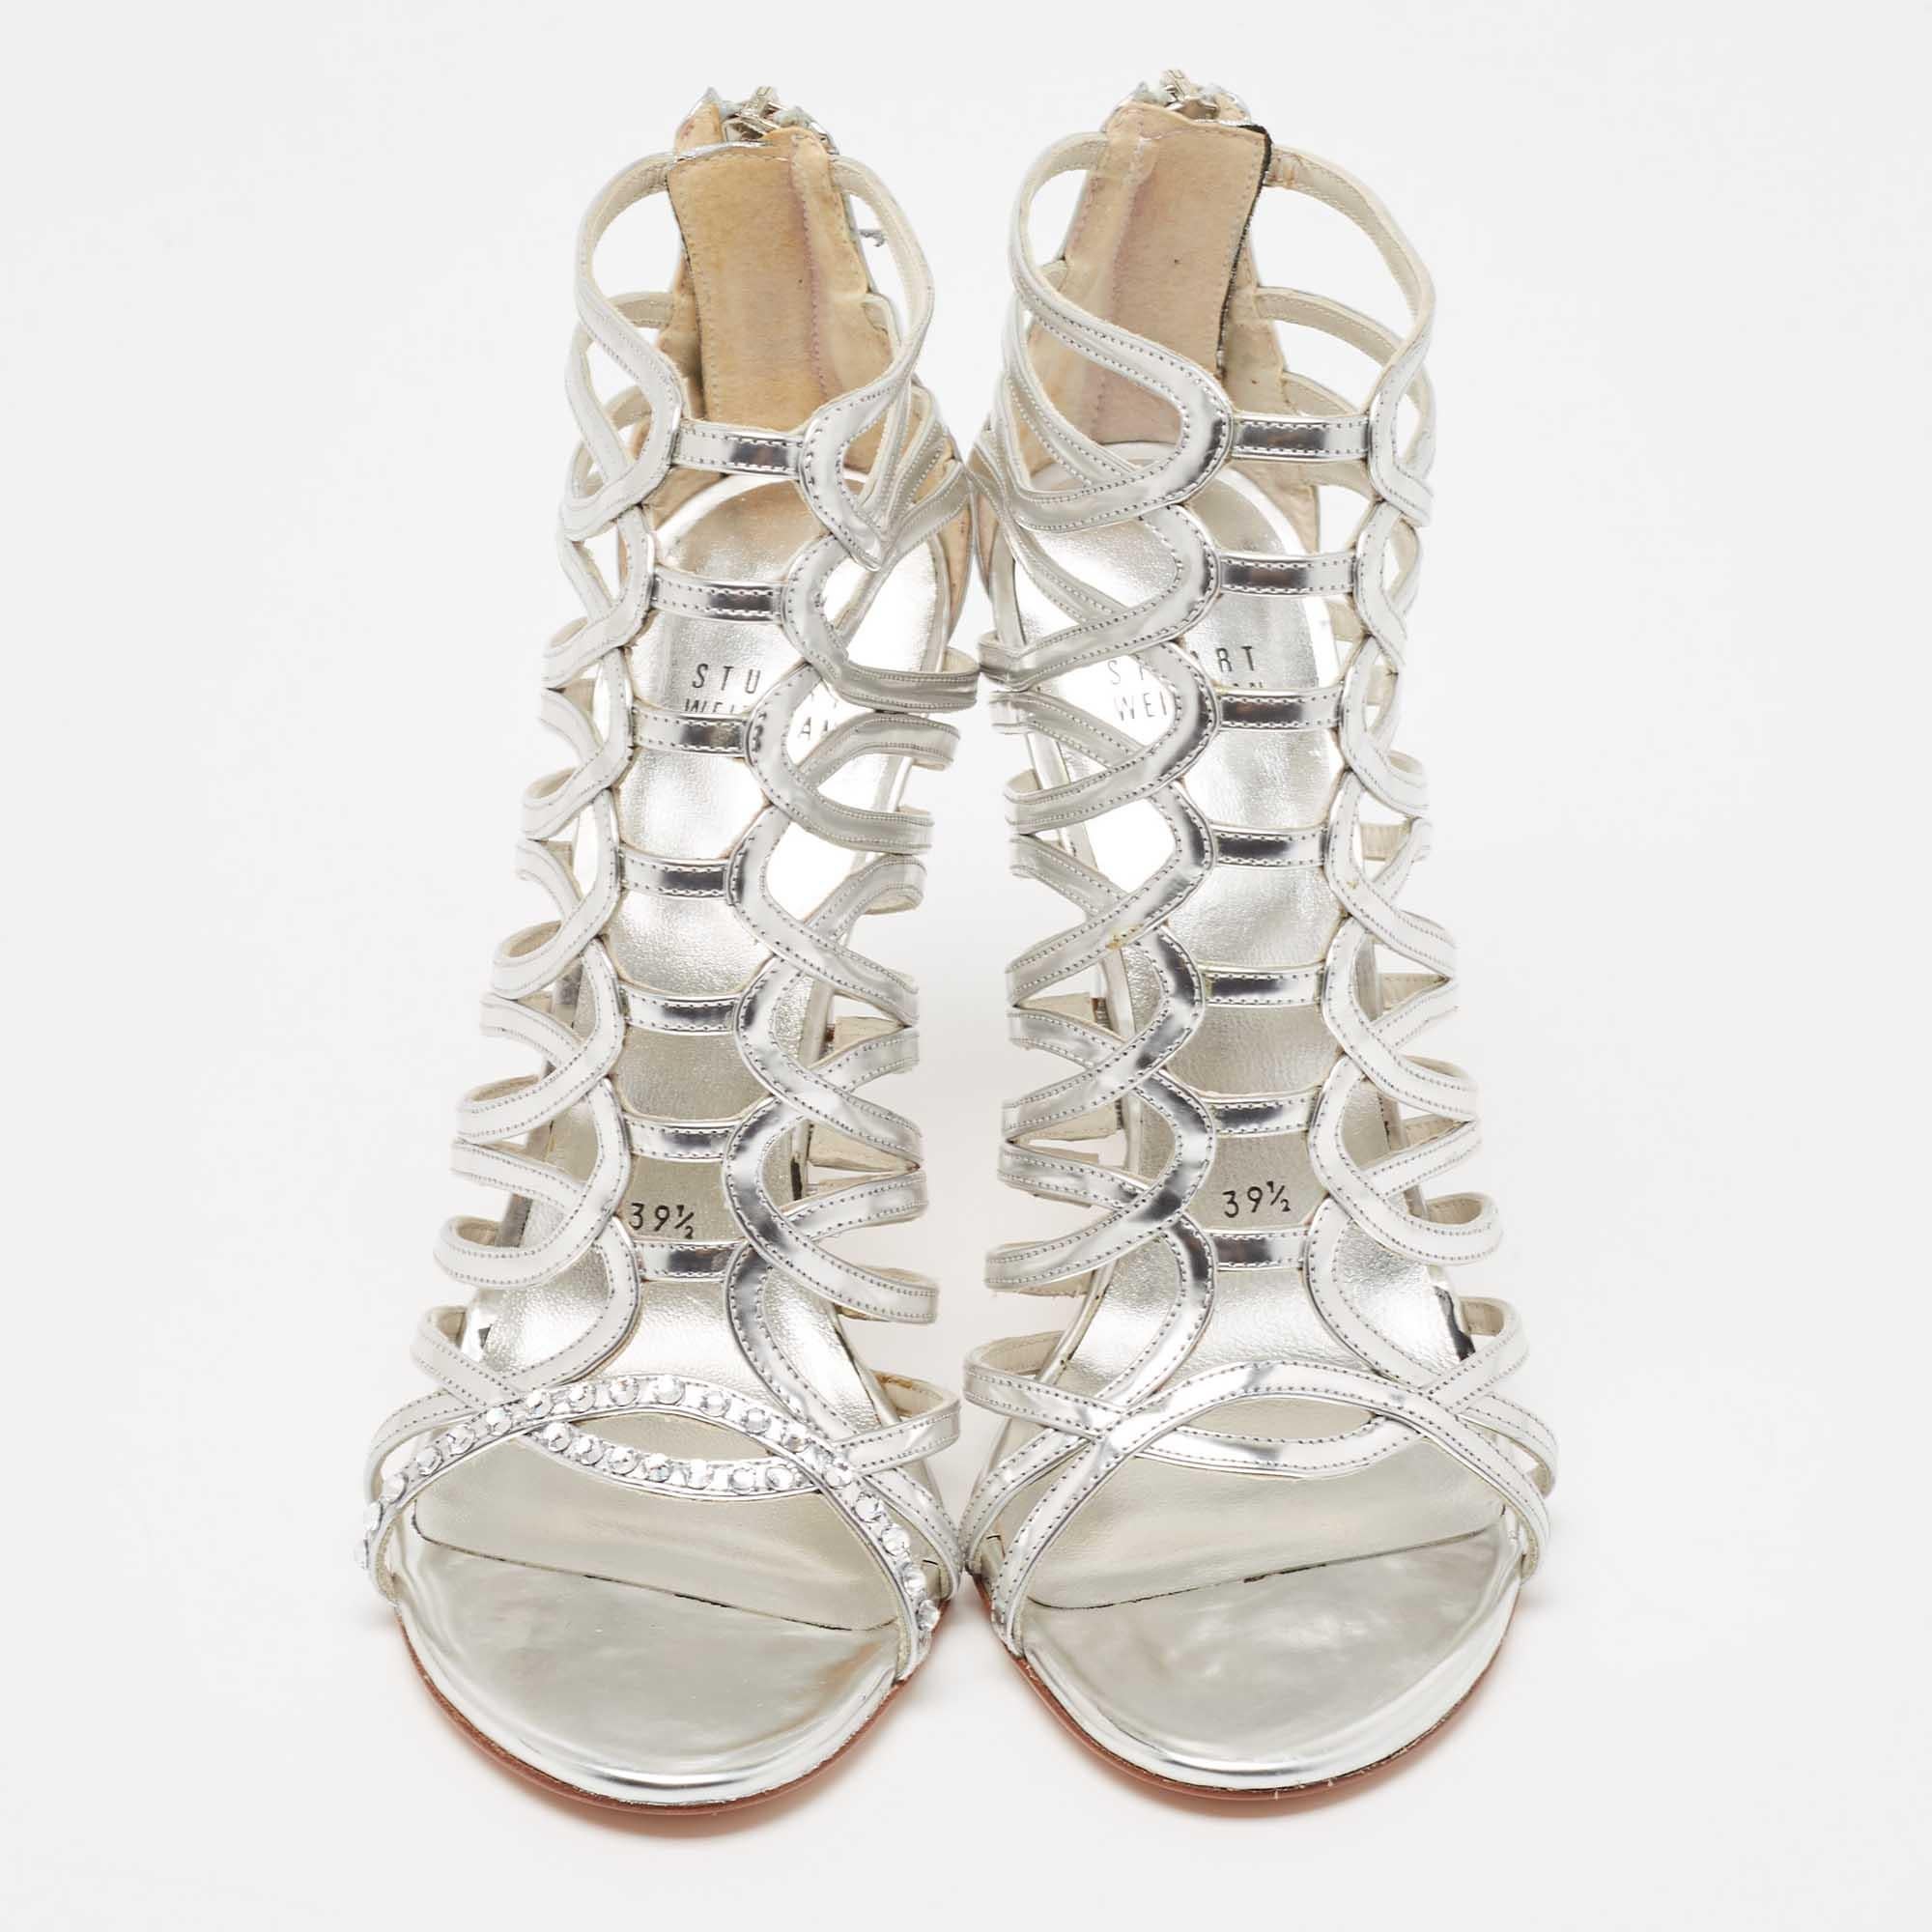 Stuart Weitzman Leather Crystal Embellished Strappy Sandals Size 39.5 In Excellent Condition For Sale In Dubai, Al Qouz 2